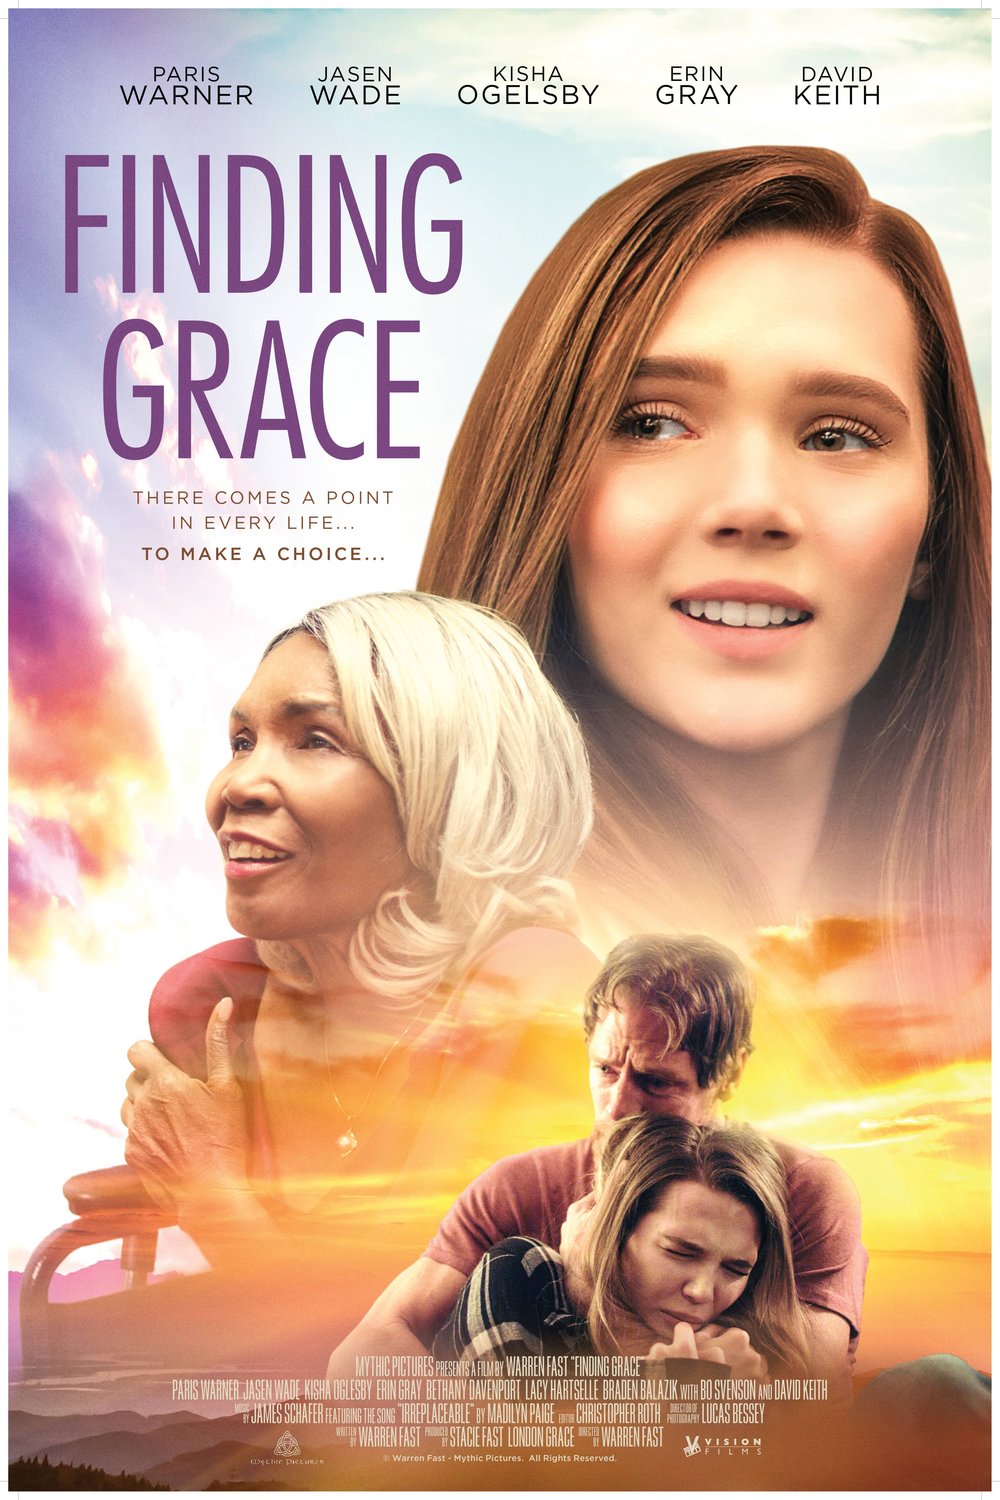 Poster of the movie Finding Grace